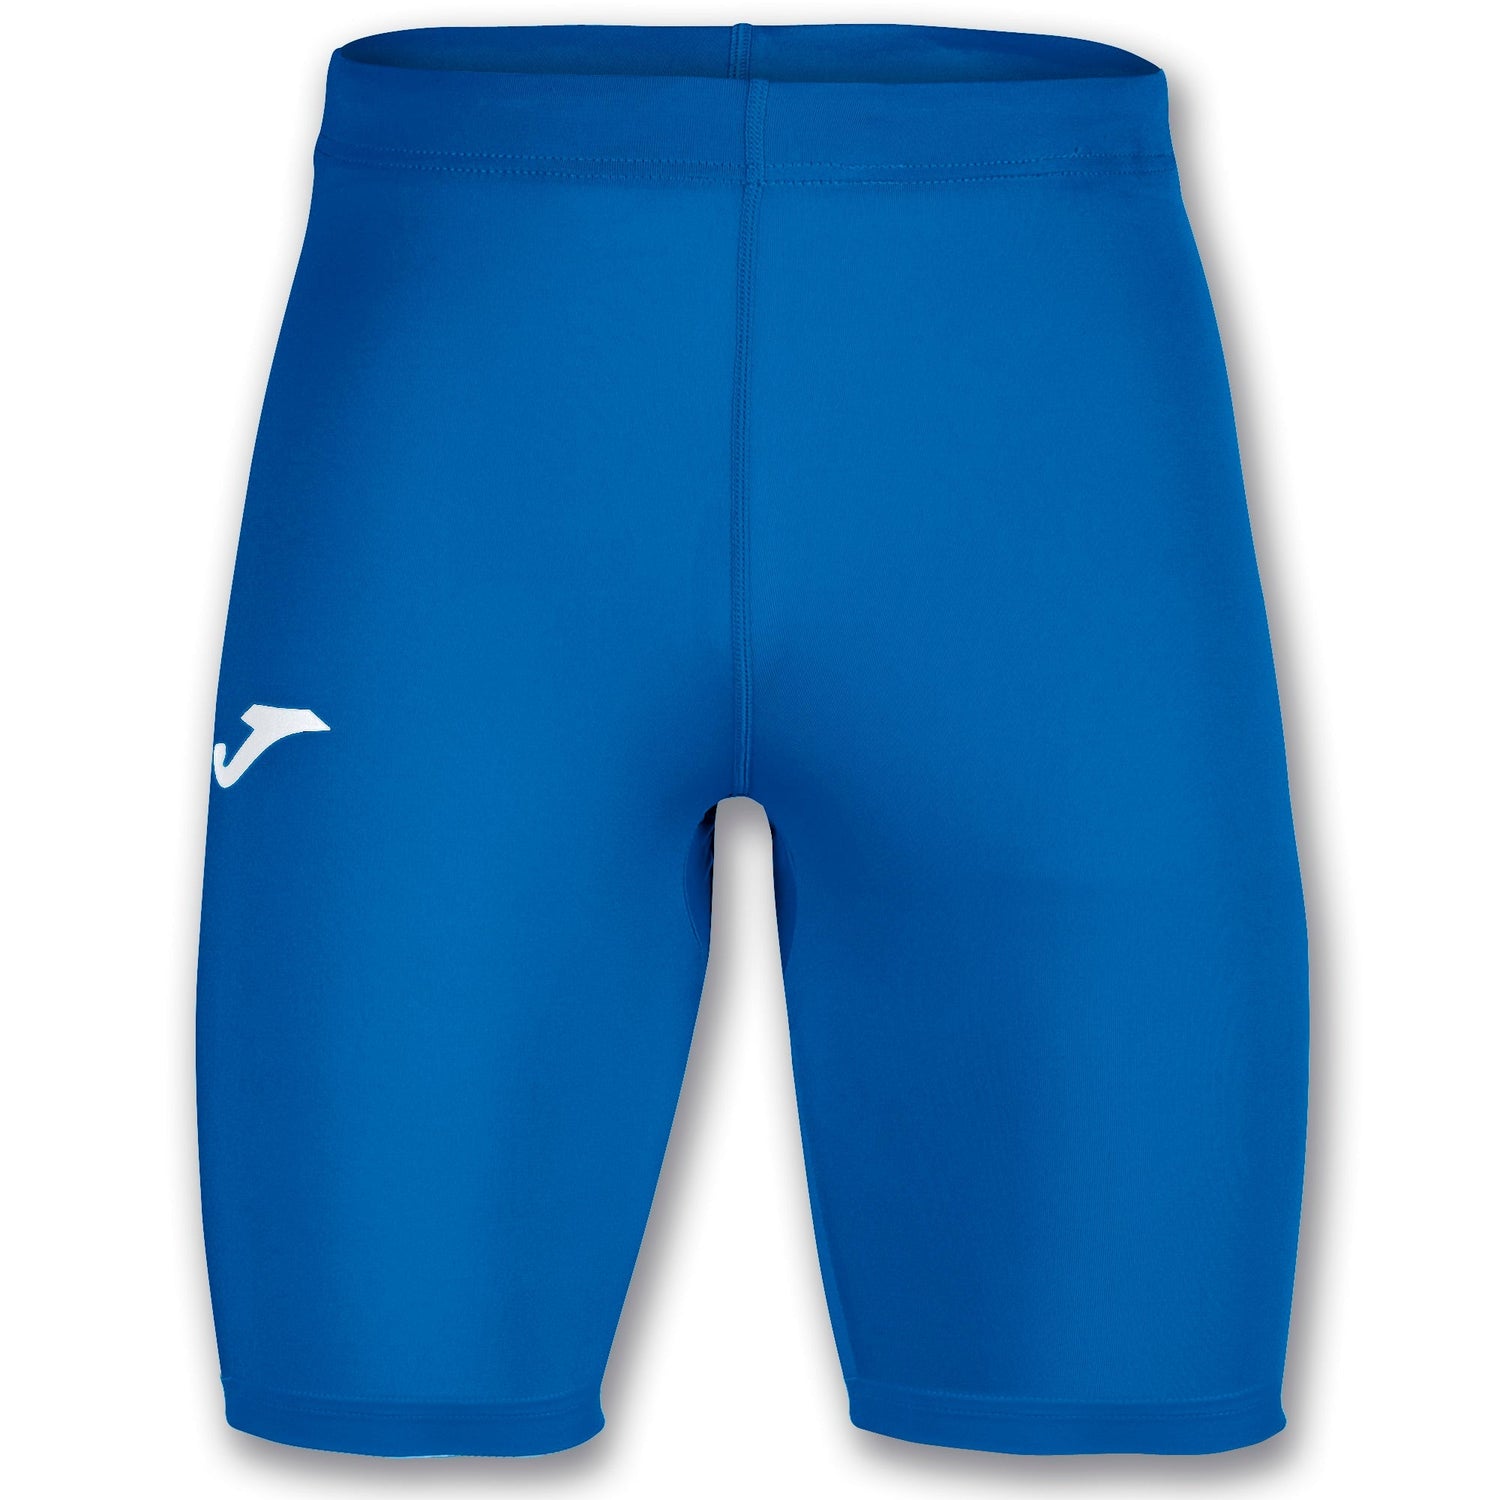 Joma Brama Baselayer Short, available in Joma Canada Store. Joma is shipping in Canada. For club offers contact us.